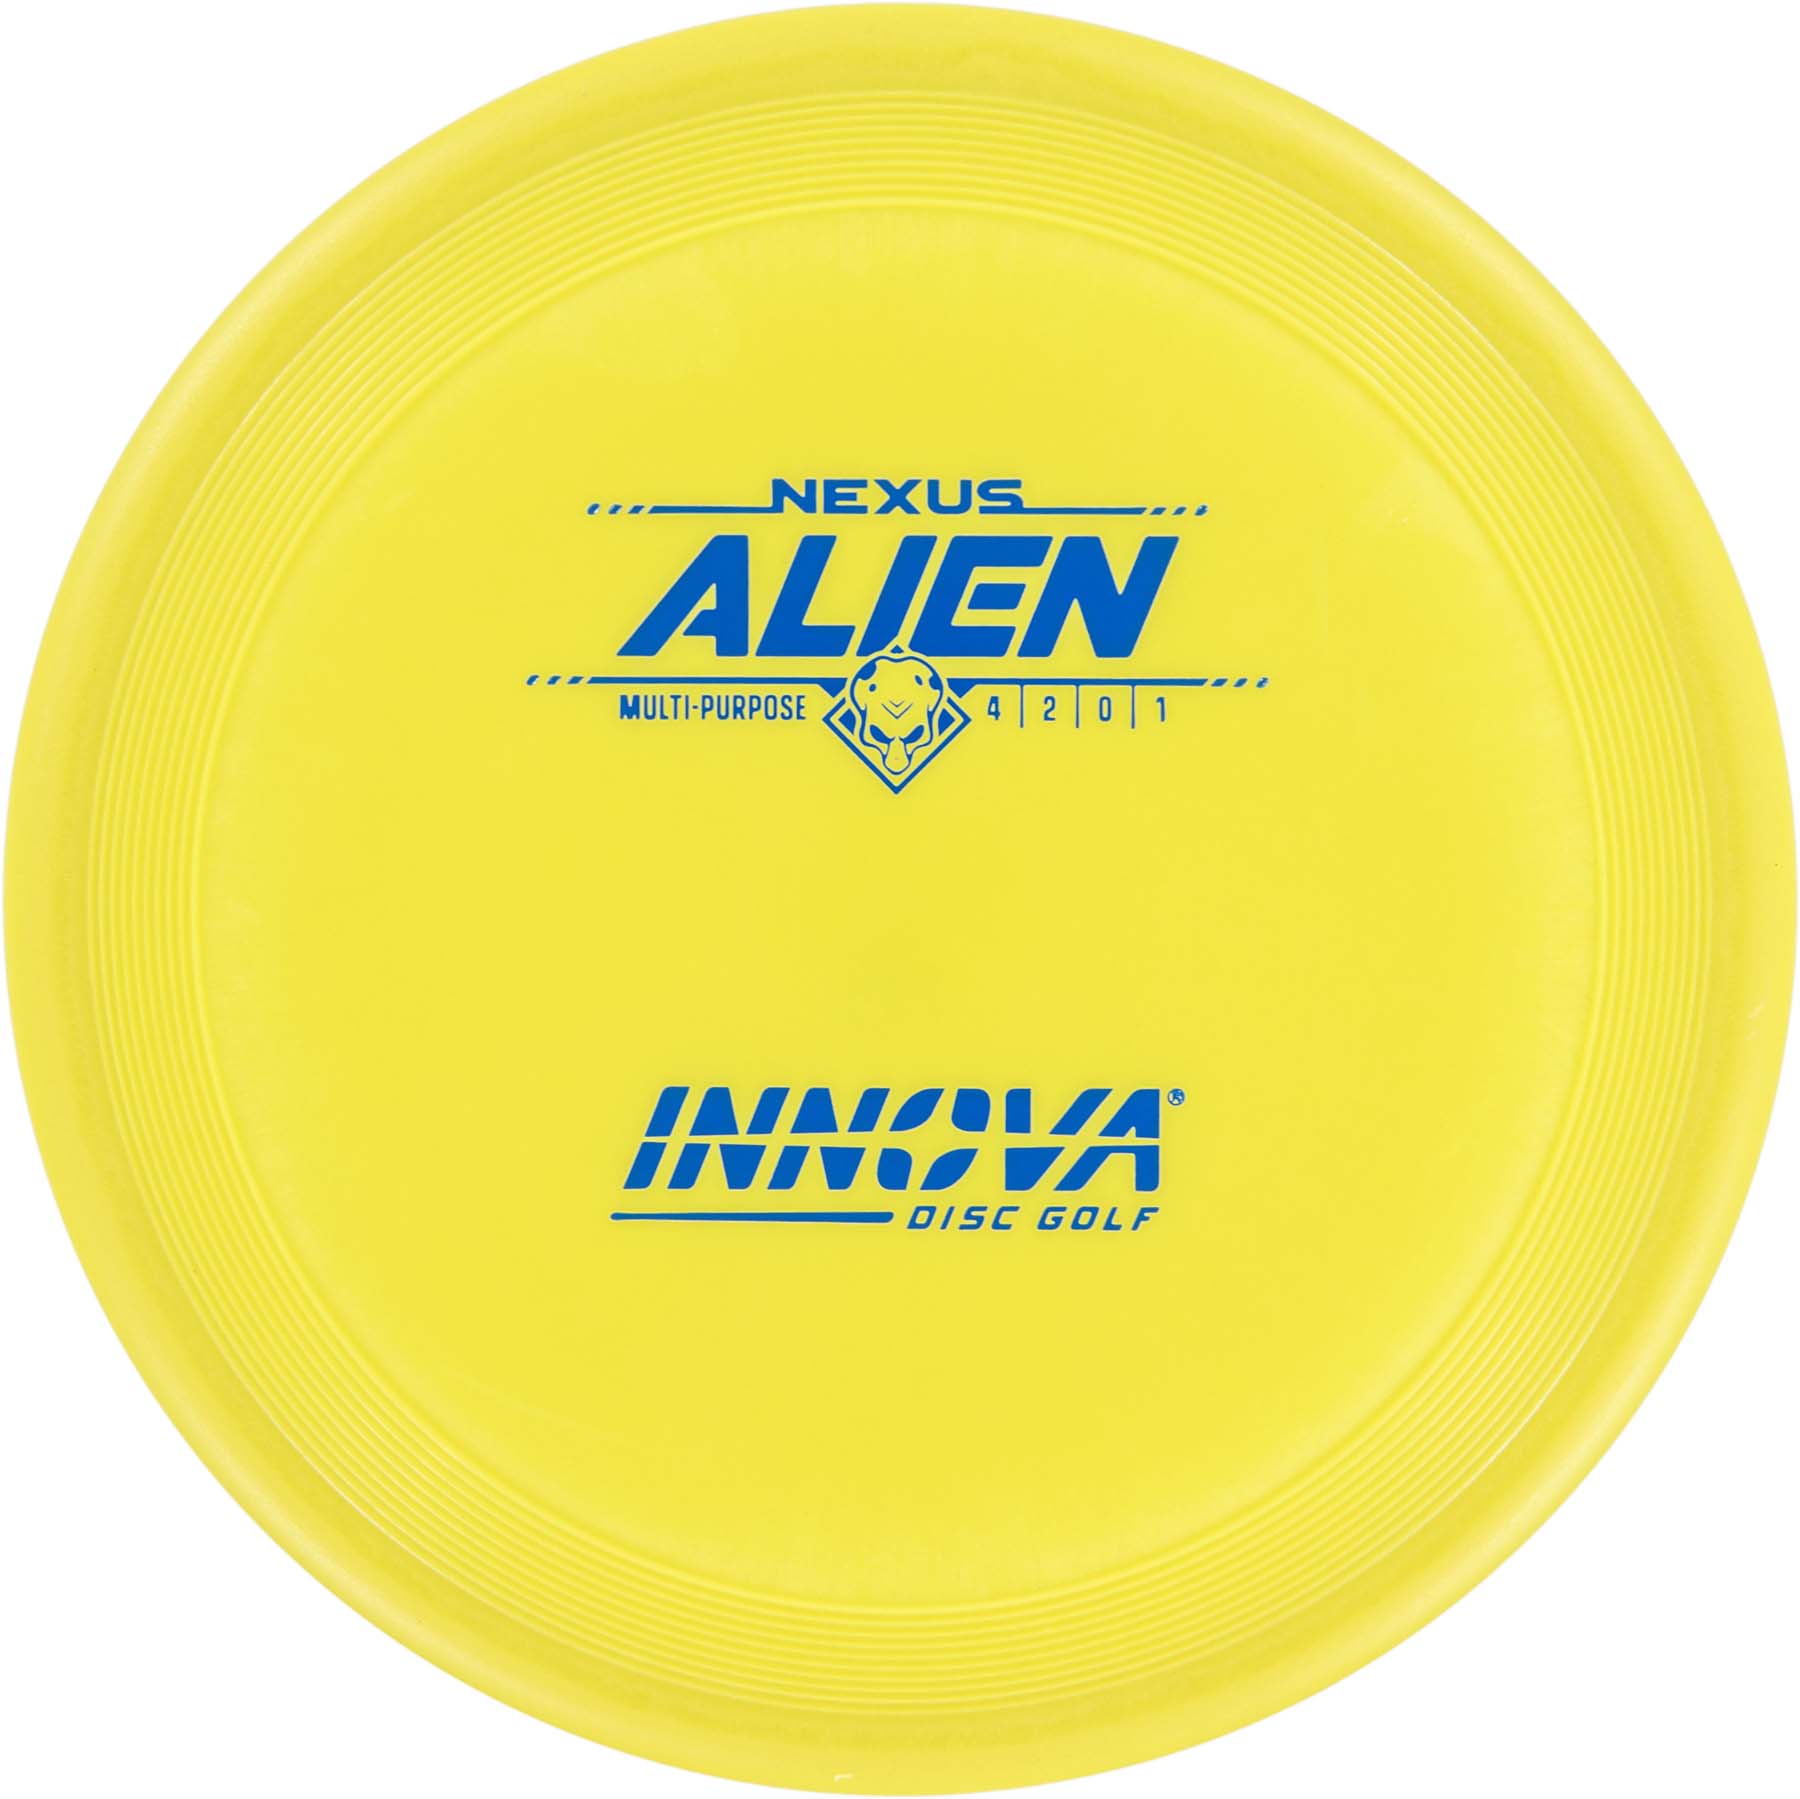 Nexus Alien - Multipurpose Disc With Excellent Grip. Yellow disc with blue stamp.